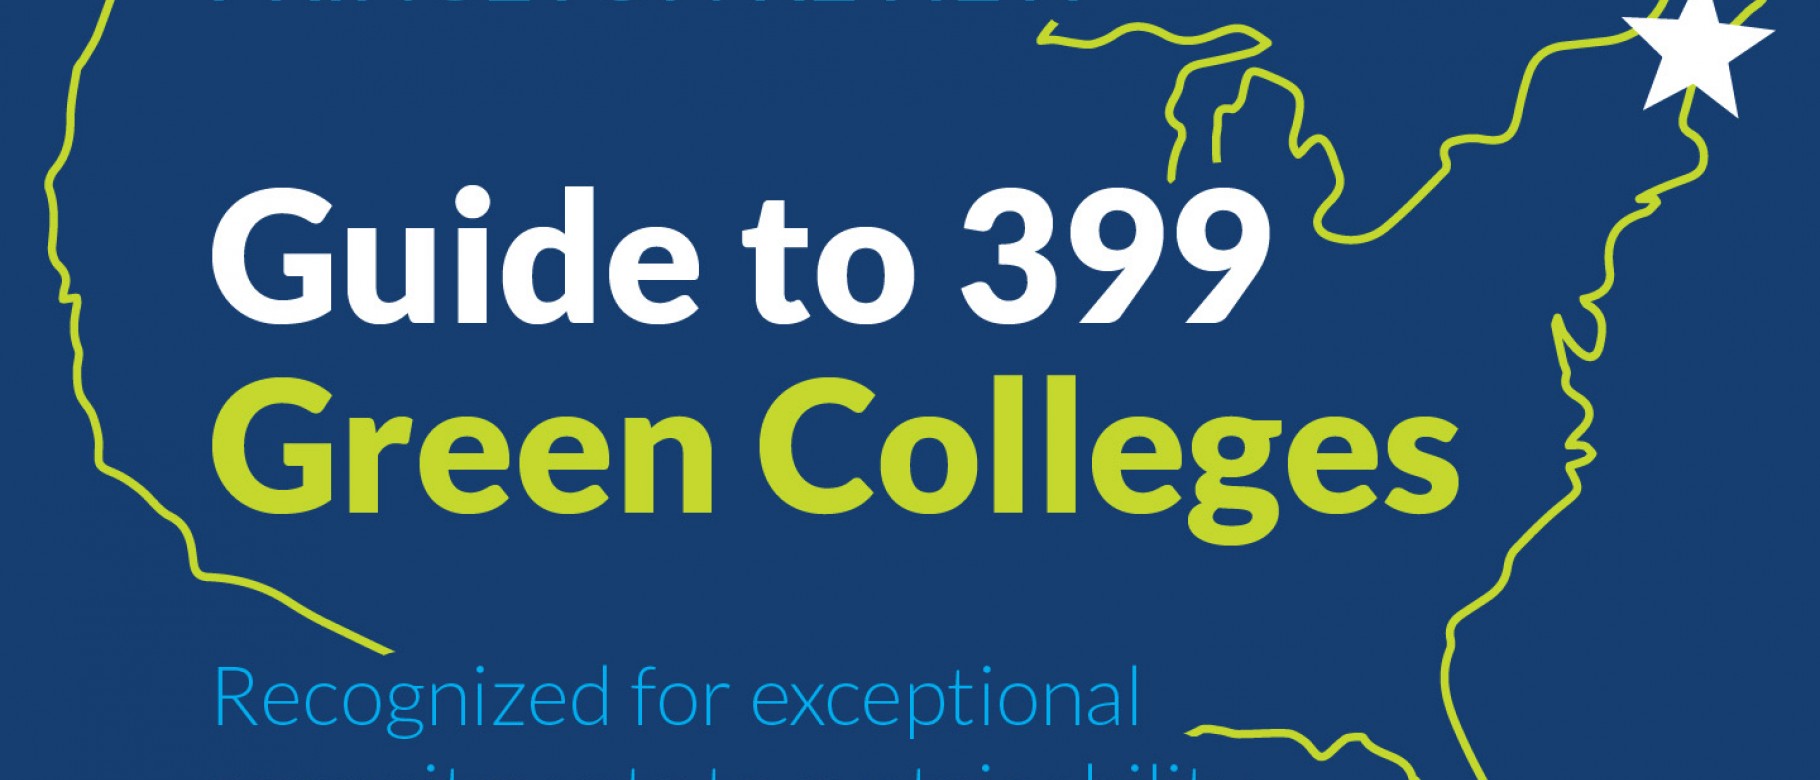 Princeton Review Guide to 399 Green Colleges